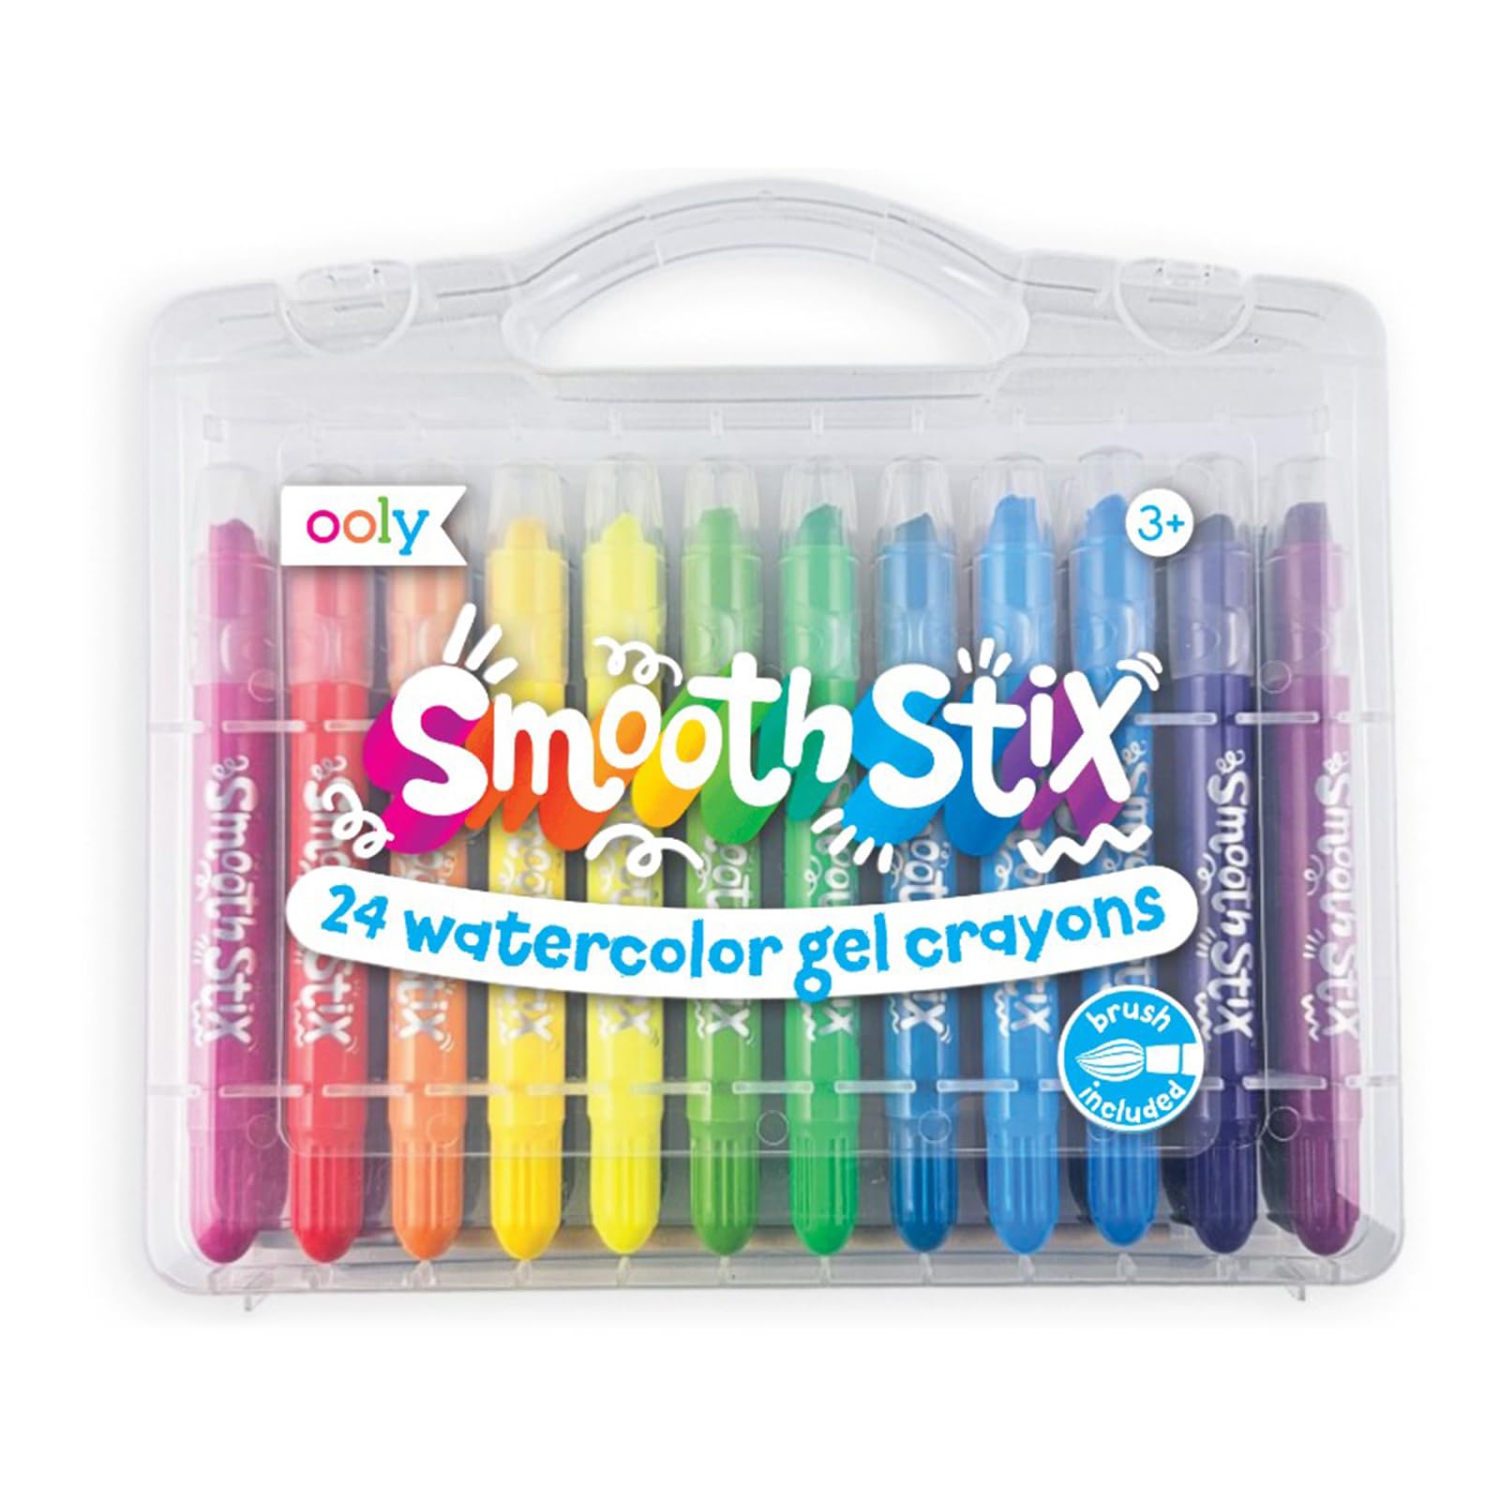 Rainbow Gel Crayons Set - Smooth Stix for Kids & Adults | 25 Watercolor Crayons with Paint Brush | Gl & Paper | Twist-Up & Easy to Clean | Clear Plastic Case